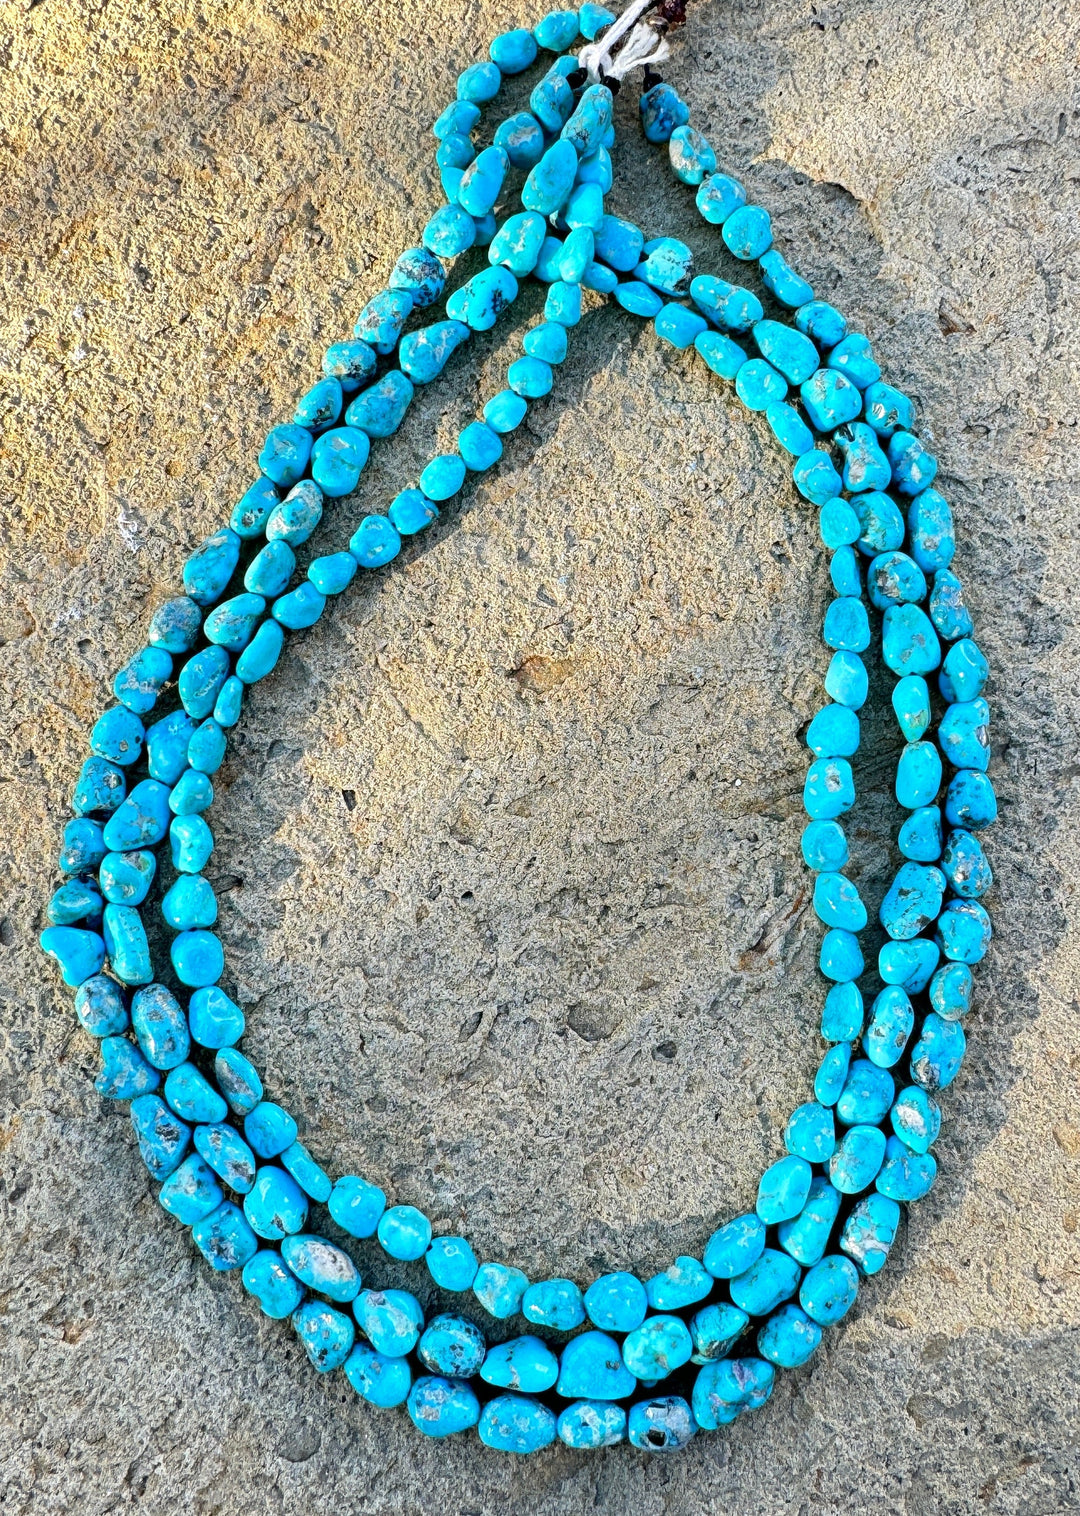 White Water Turquoise (Mexico) 7-10mm Nugget Beads 16 inch